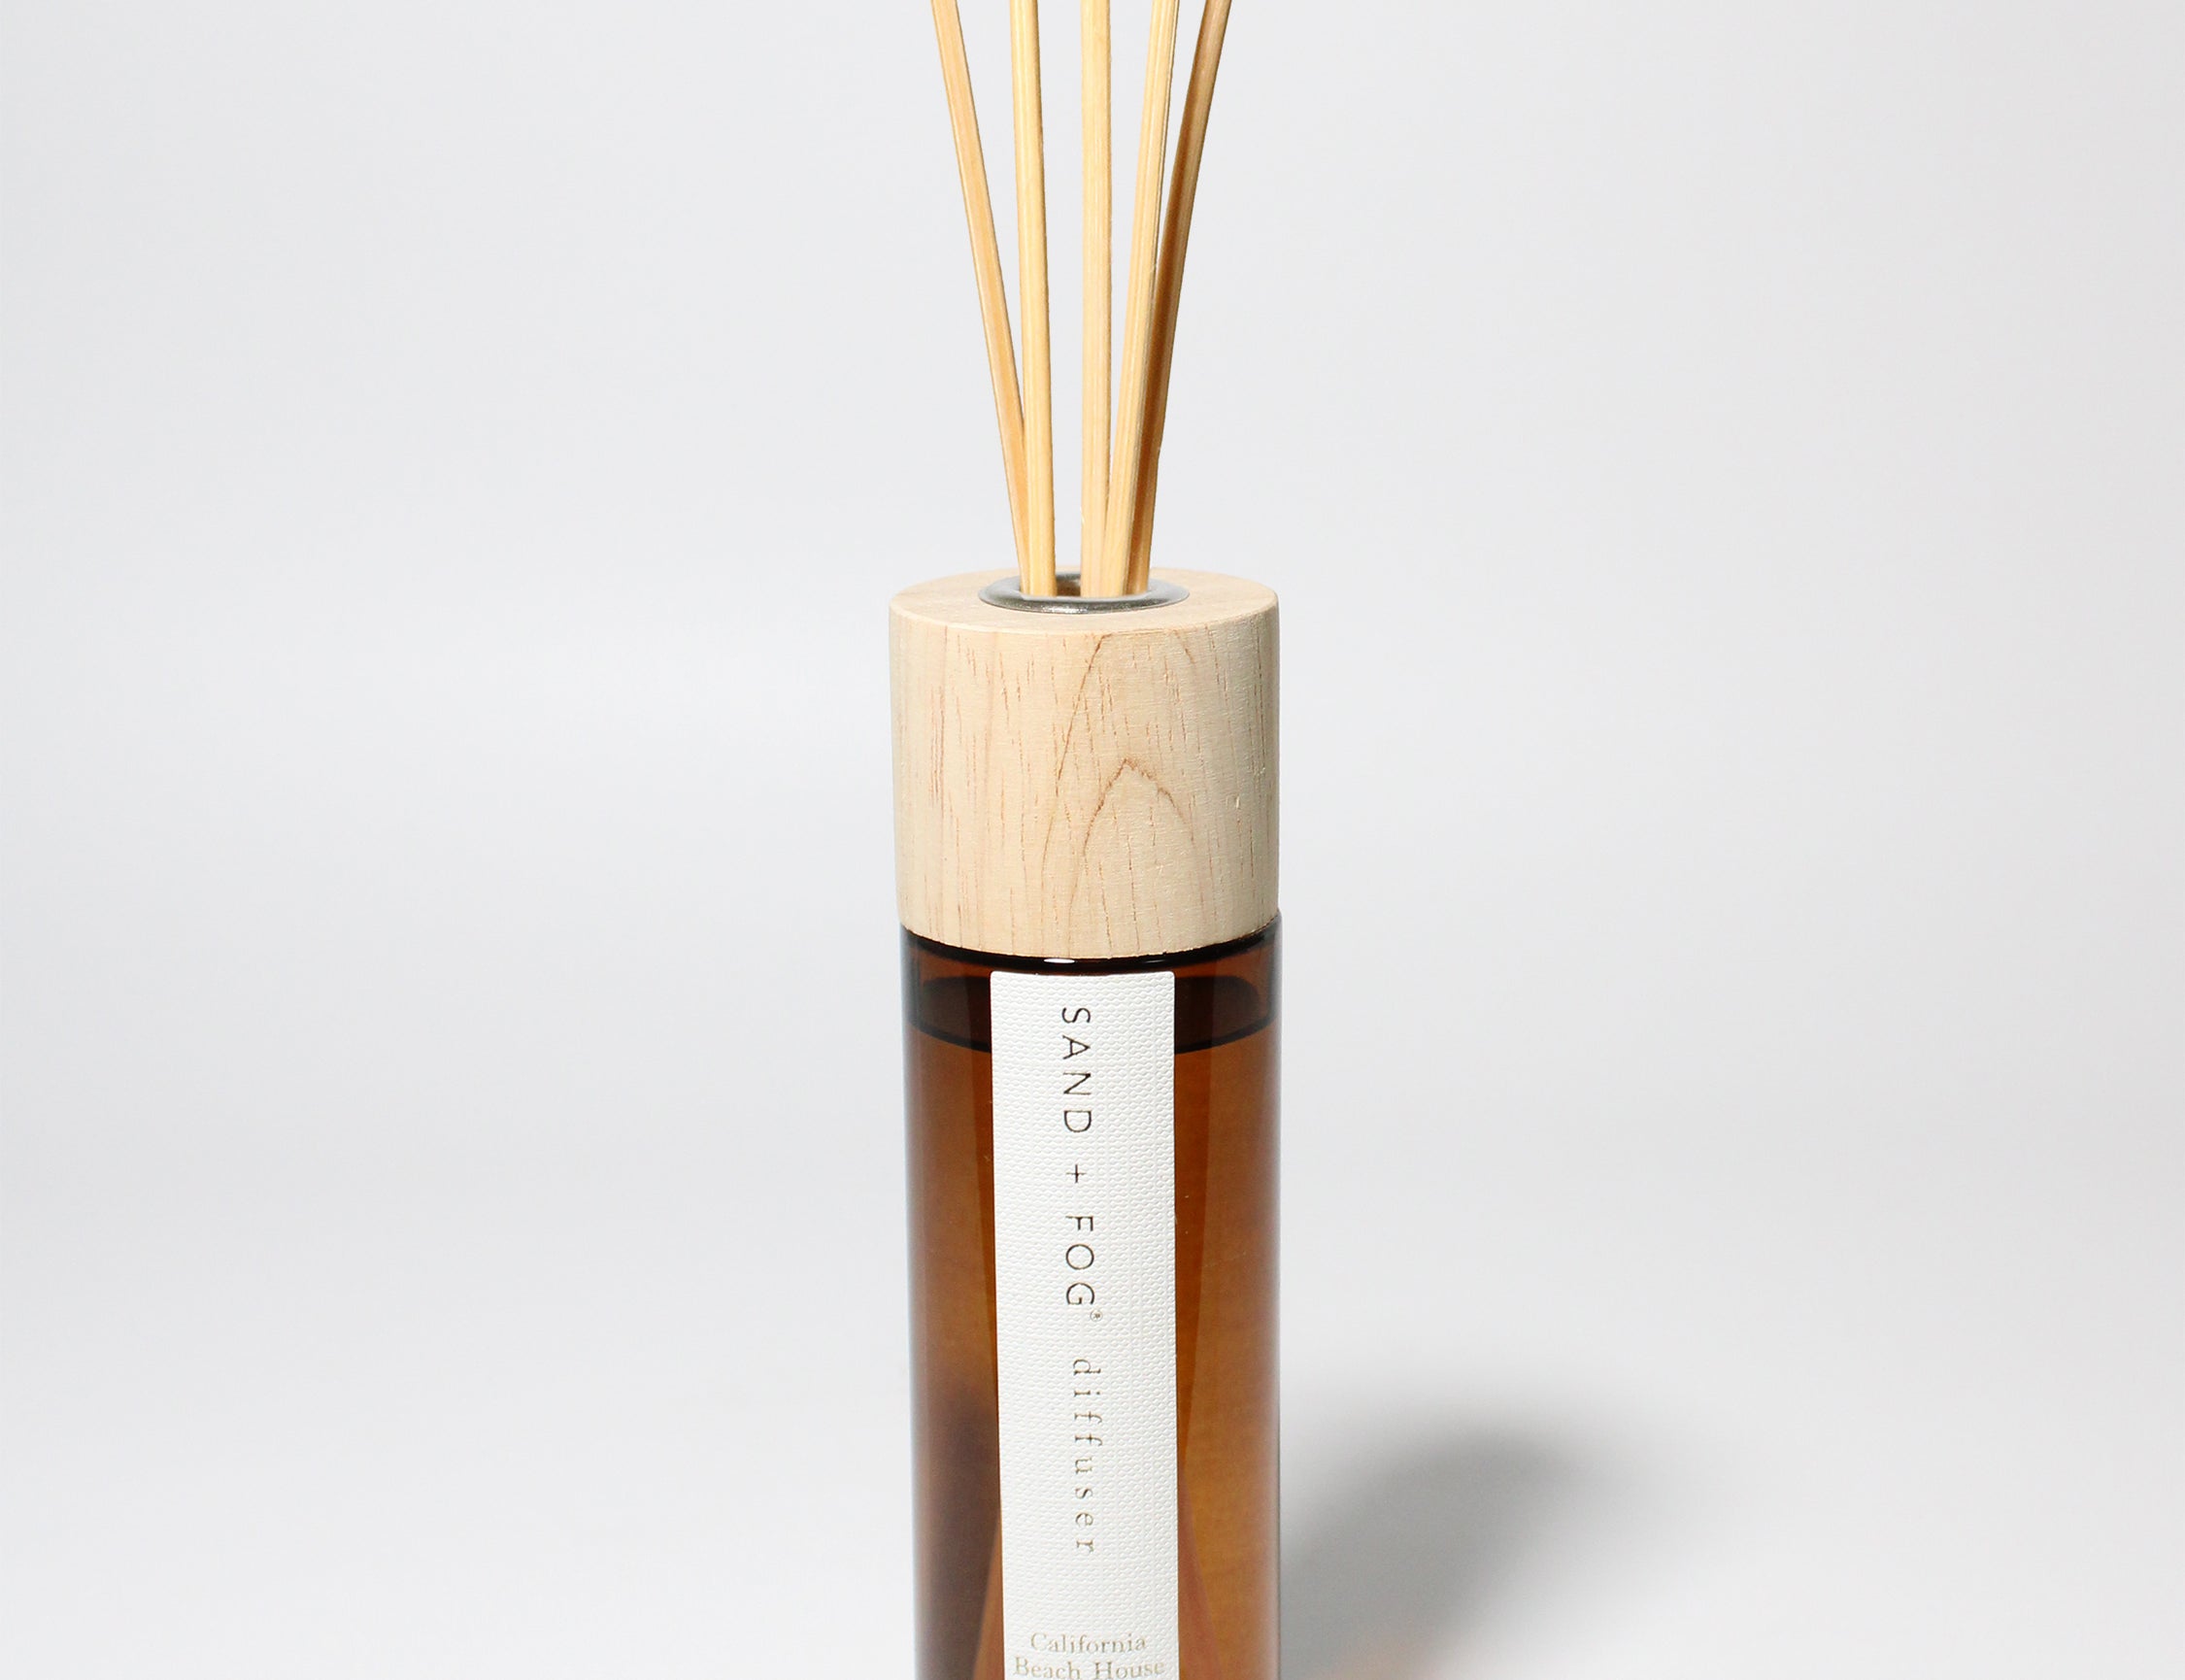 California Beach House reed diffuser Black Glass with Wood Top